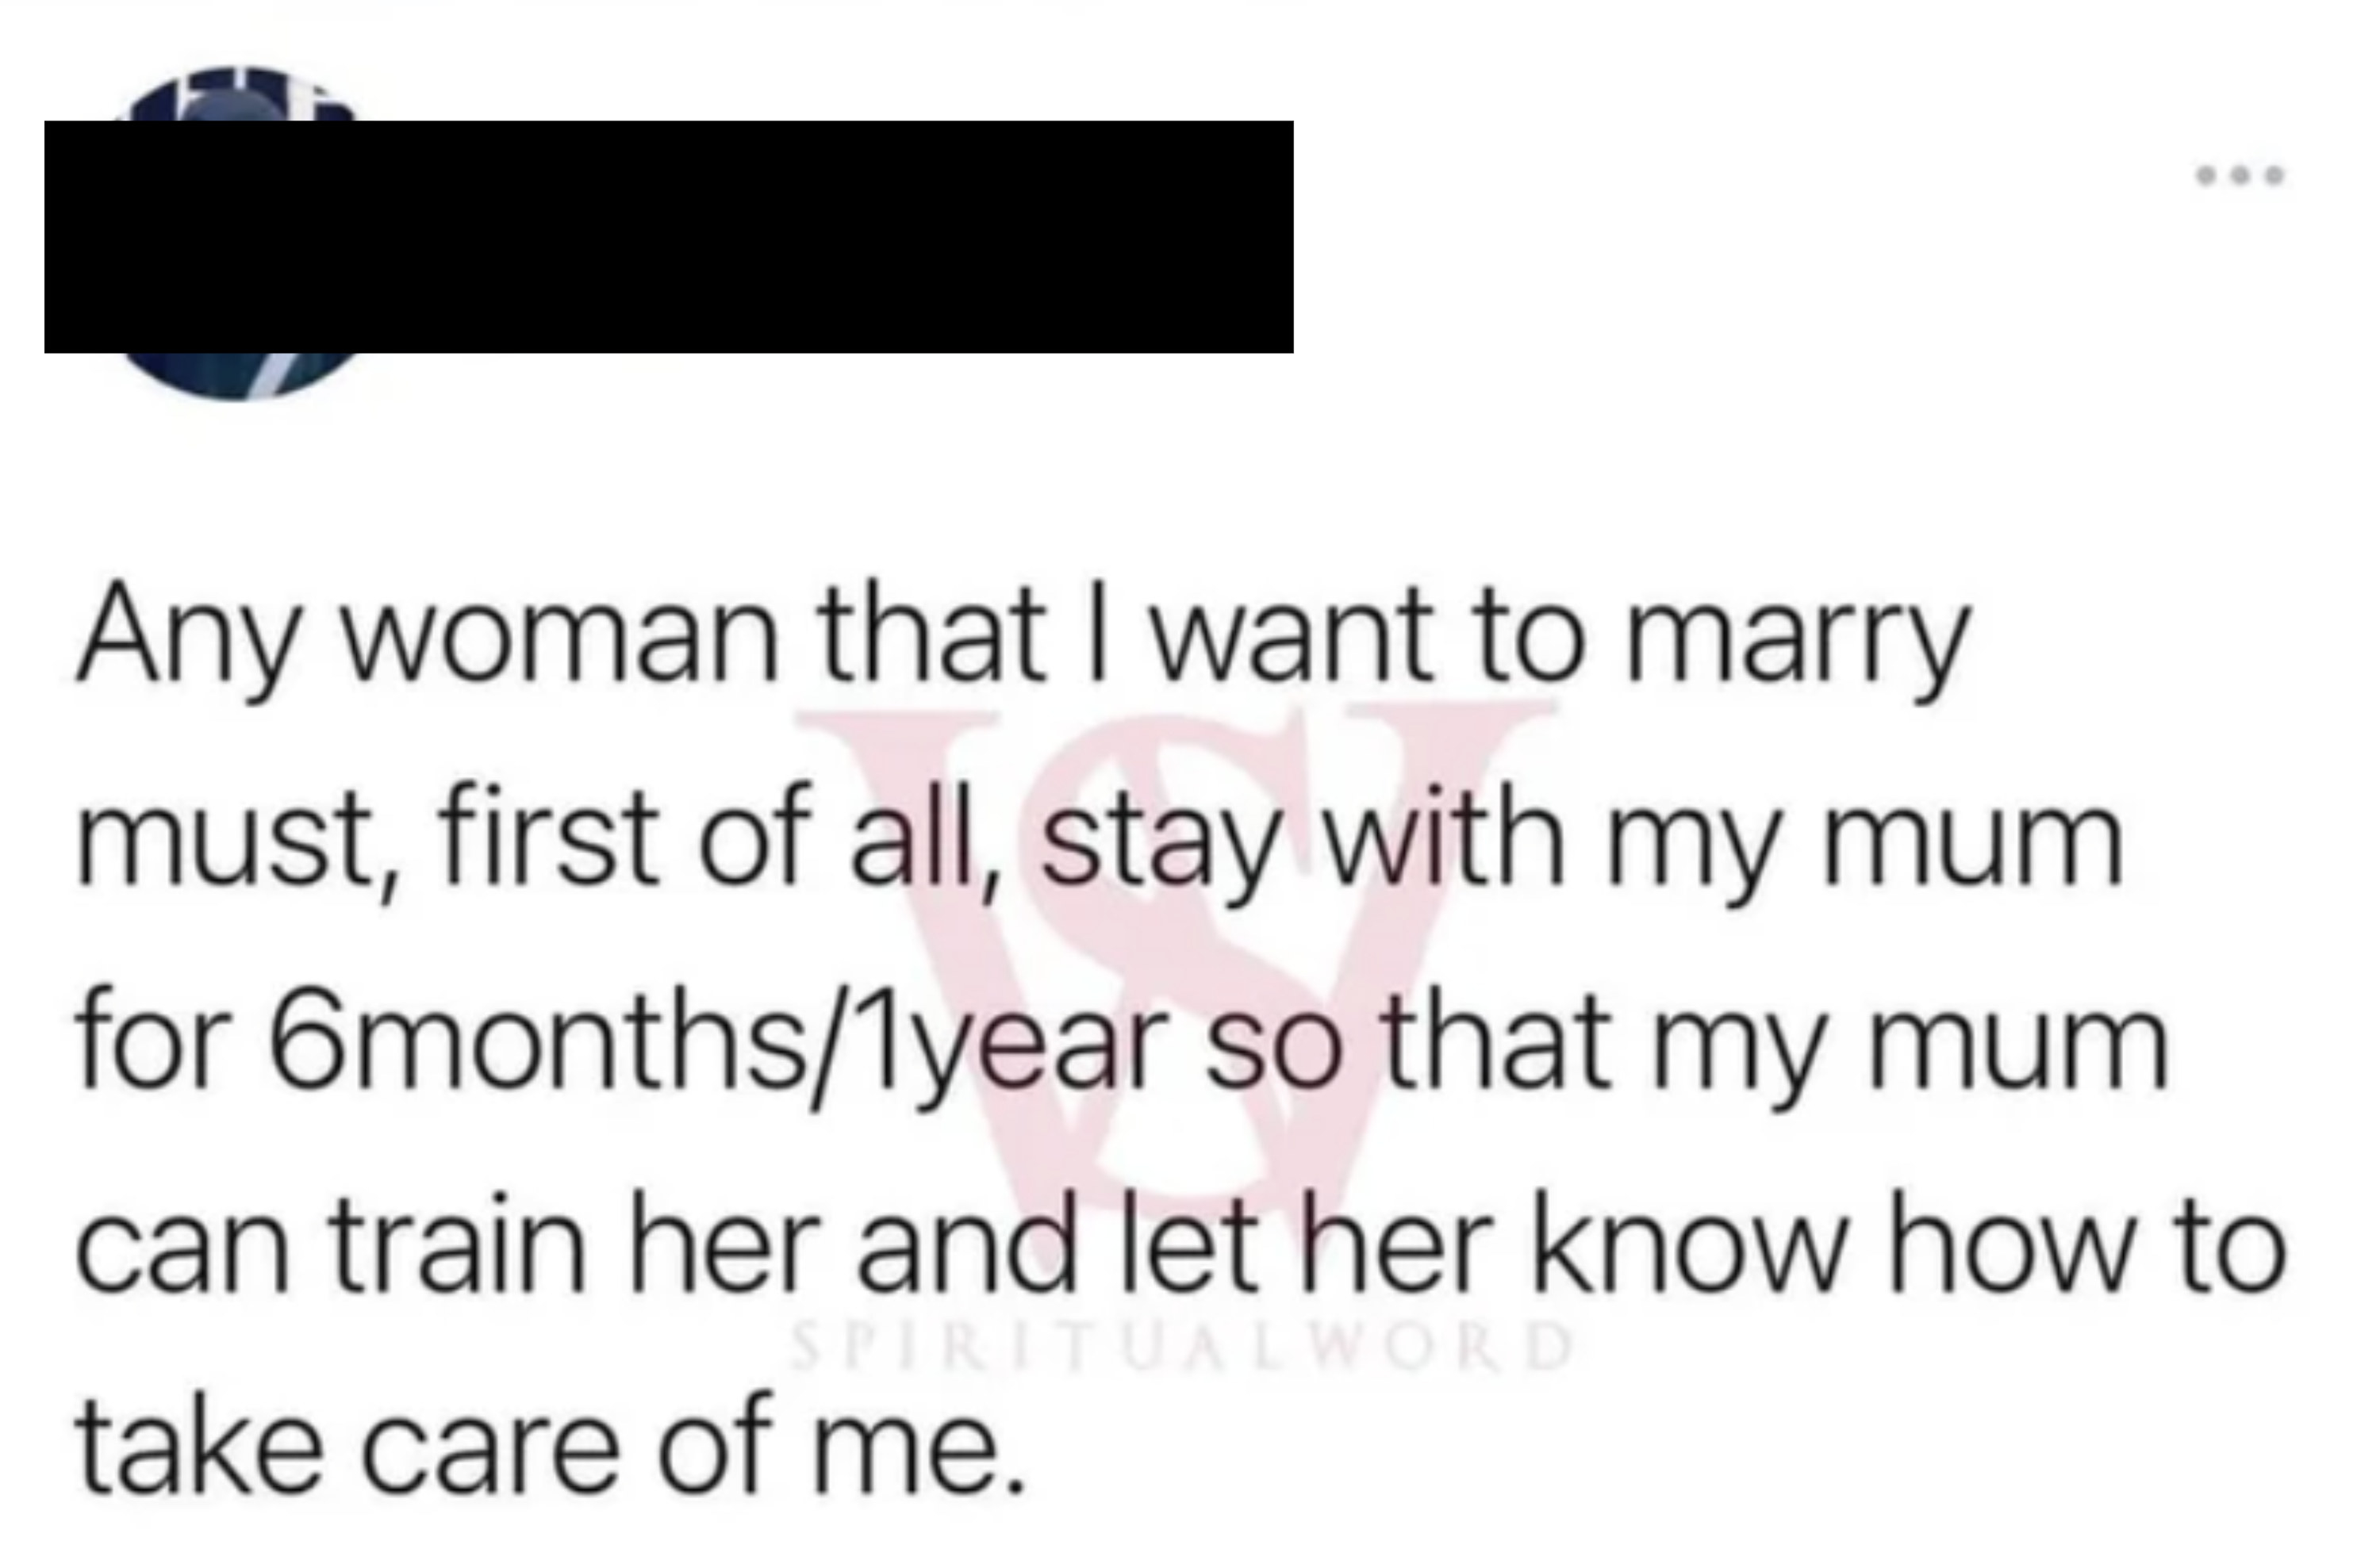 &quot;Any woman that I want to marry must, first of all, stay with my mum for 6months/1year so that my mum can train her and let her know how to take care of me.&quot;